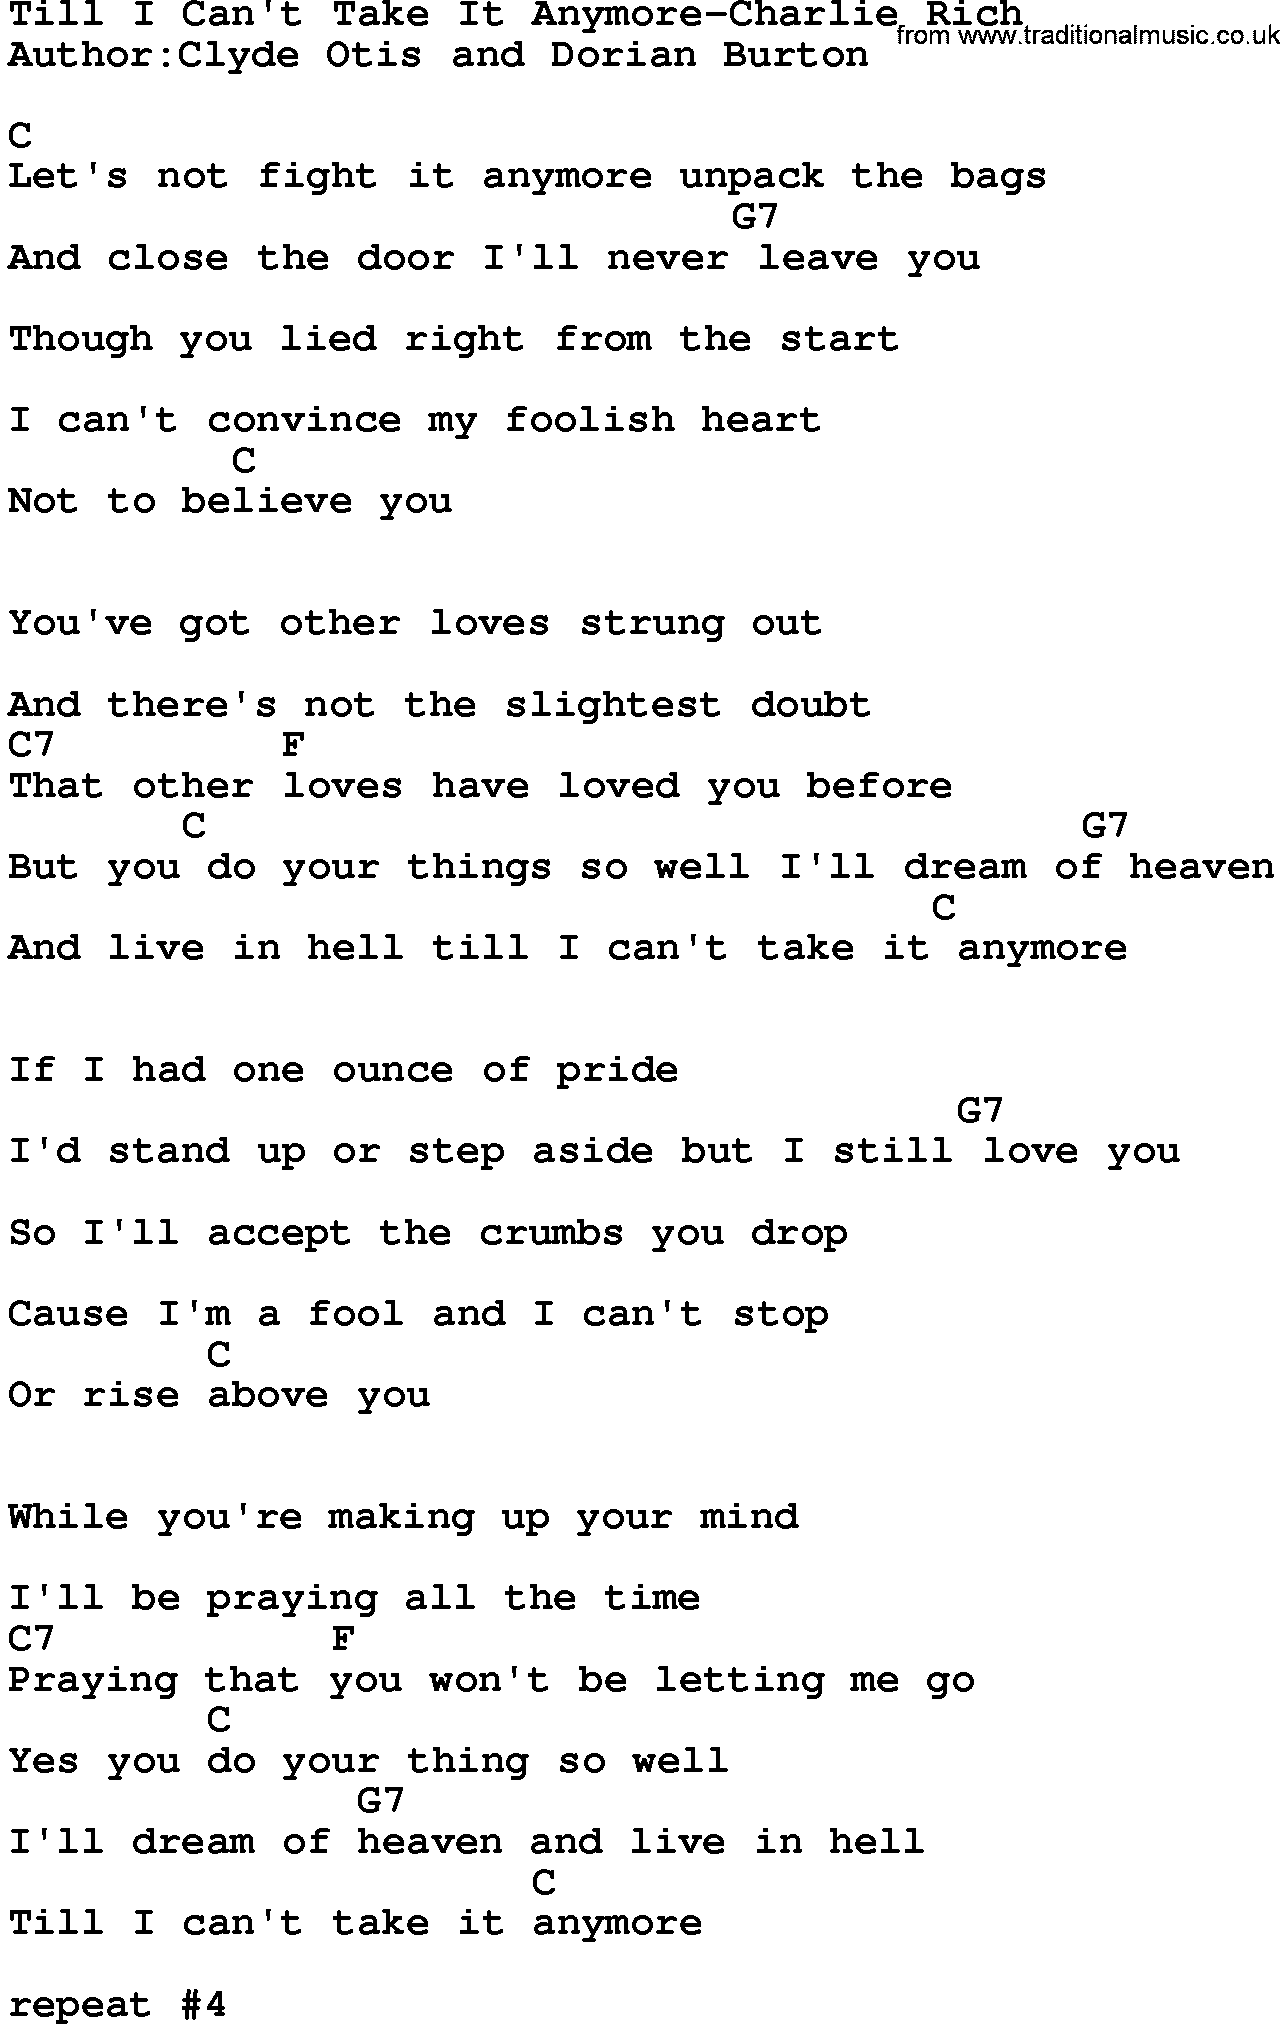 Country music song: Till I Can't Take It Anymore-Charlie Rich lyrics and chords